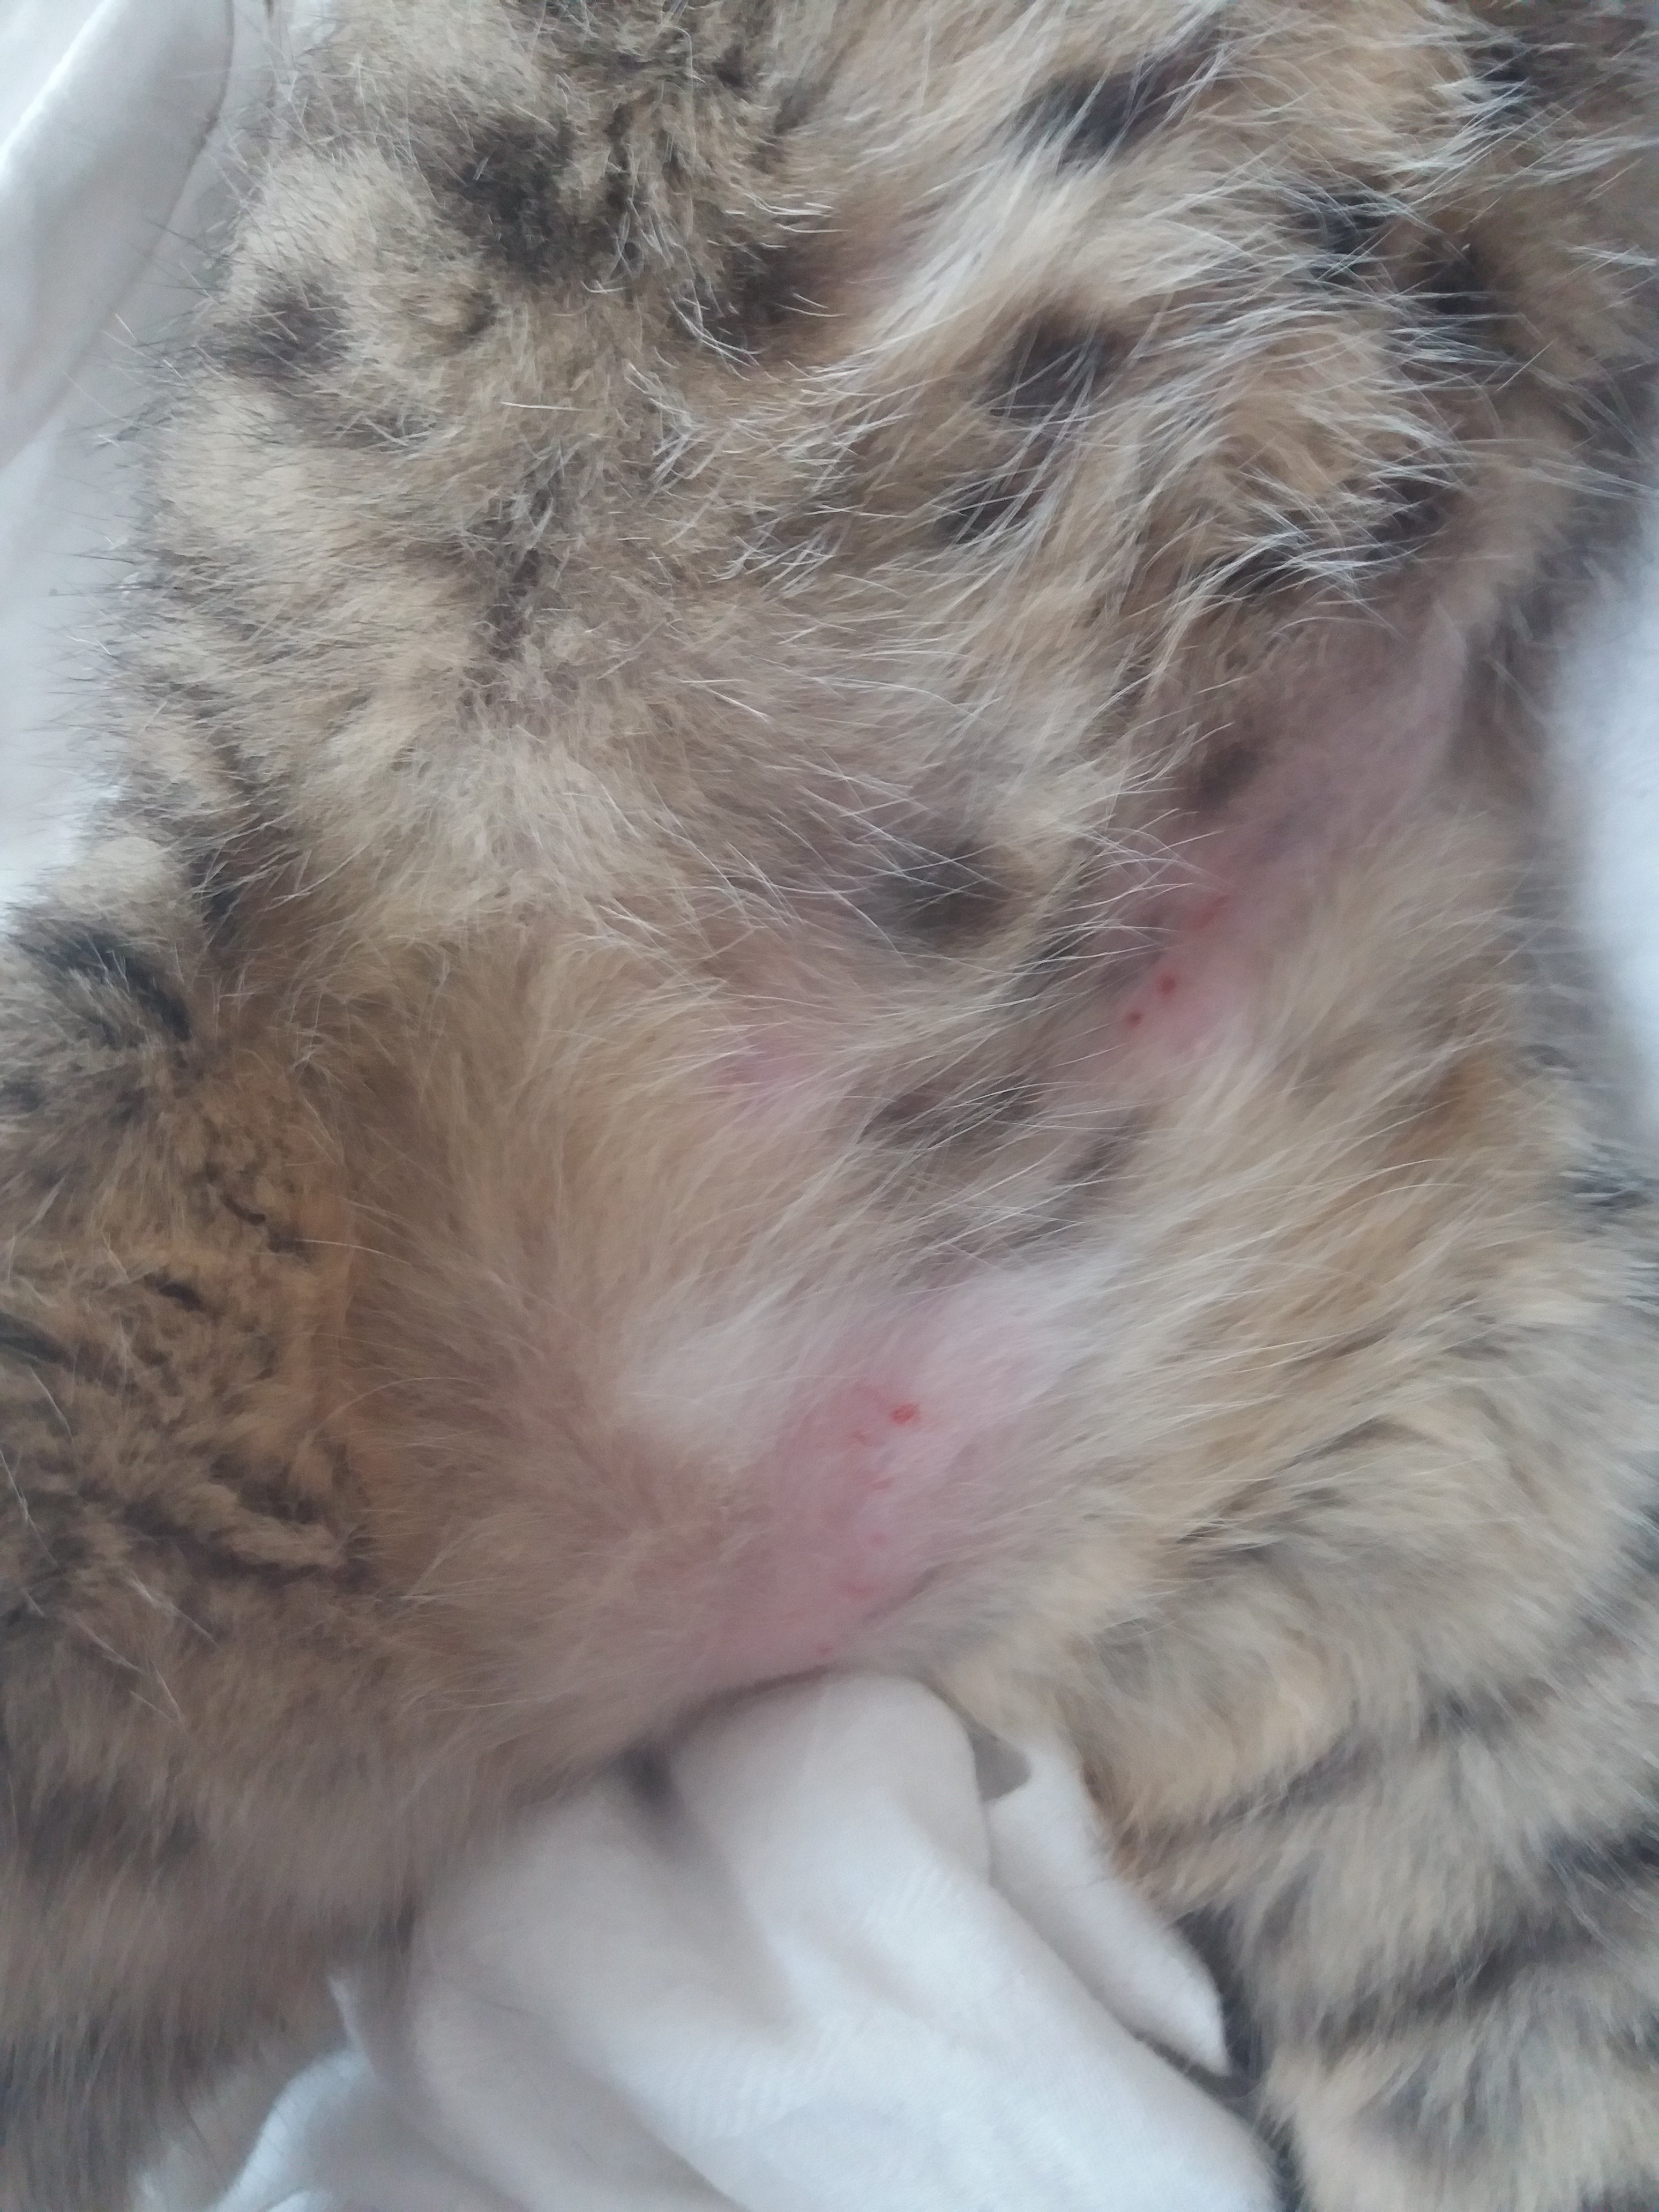 Cats Skin Has Many Red Spots And He Seems Itchy Pictures Thecatsite